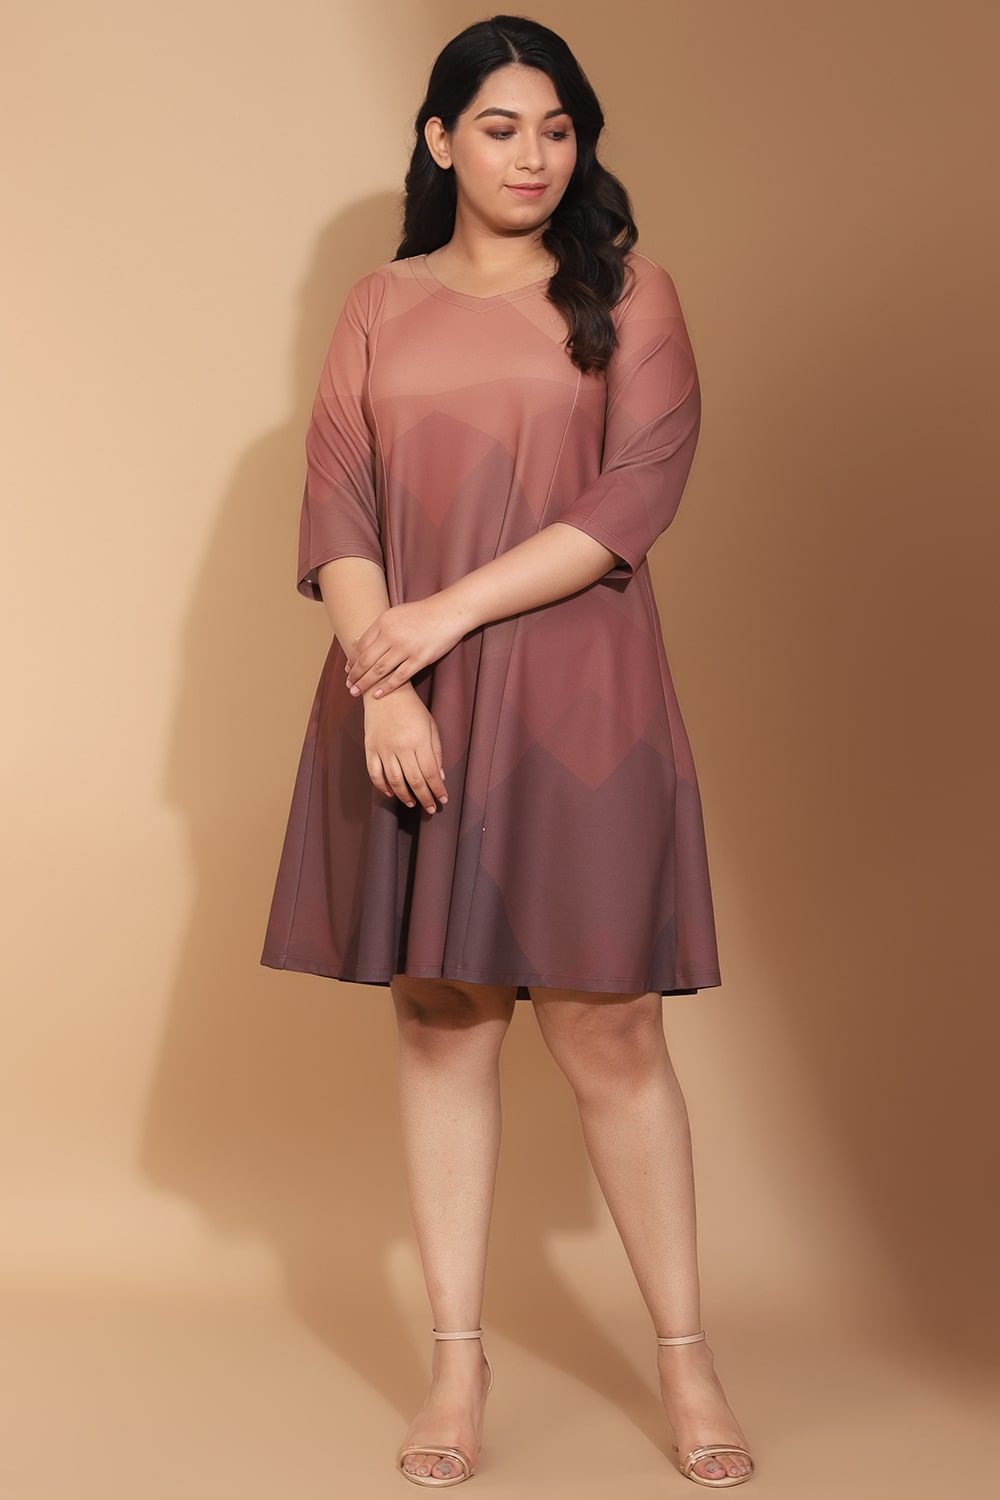 Plus Size Gown Perfect For The Cocktail Party at Rs 4200.00 | Gurgaon |  Delhi| ID: 2849602451330